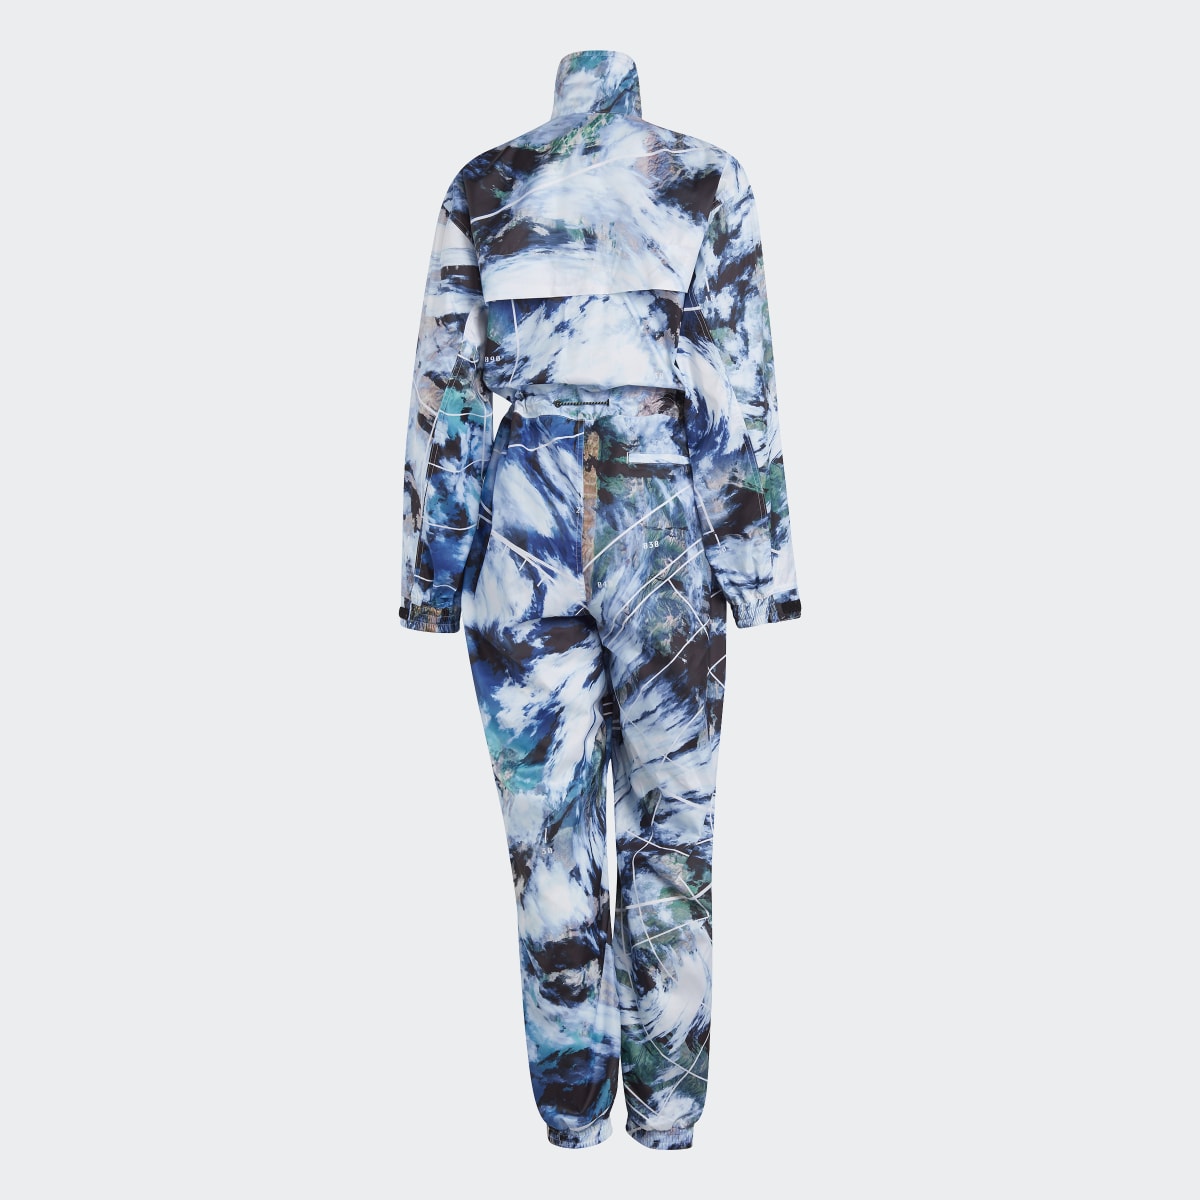 Adidas by Stella McCartney TrueCasuals All-in-One Overall. 6